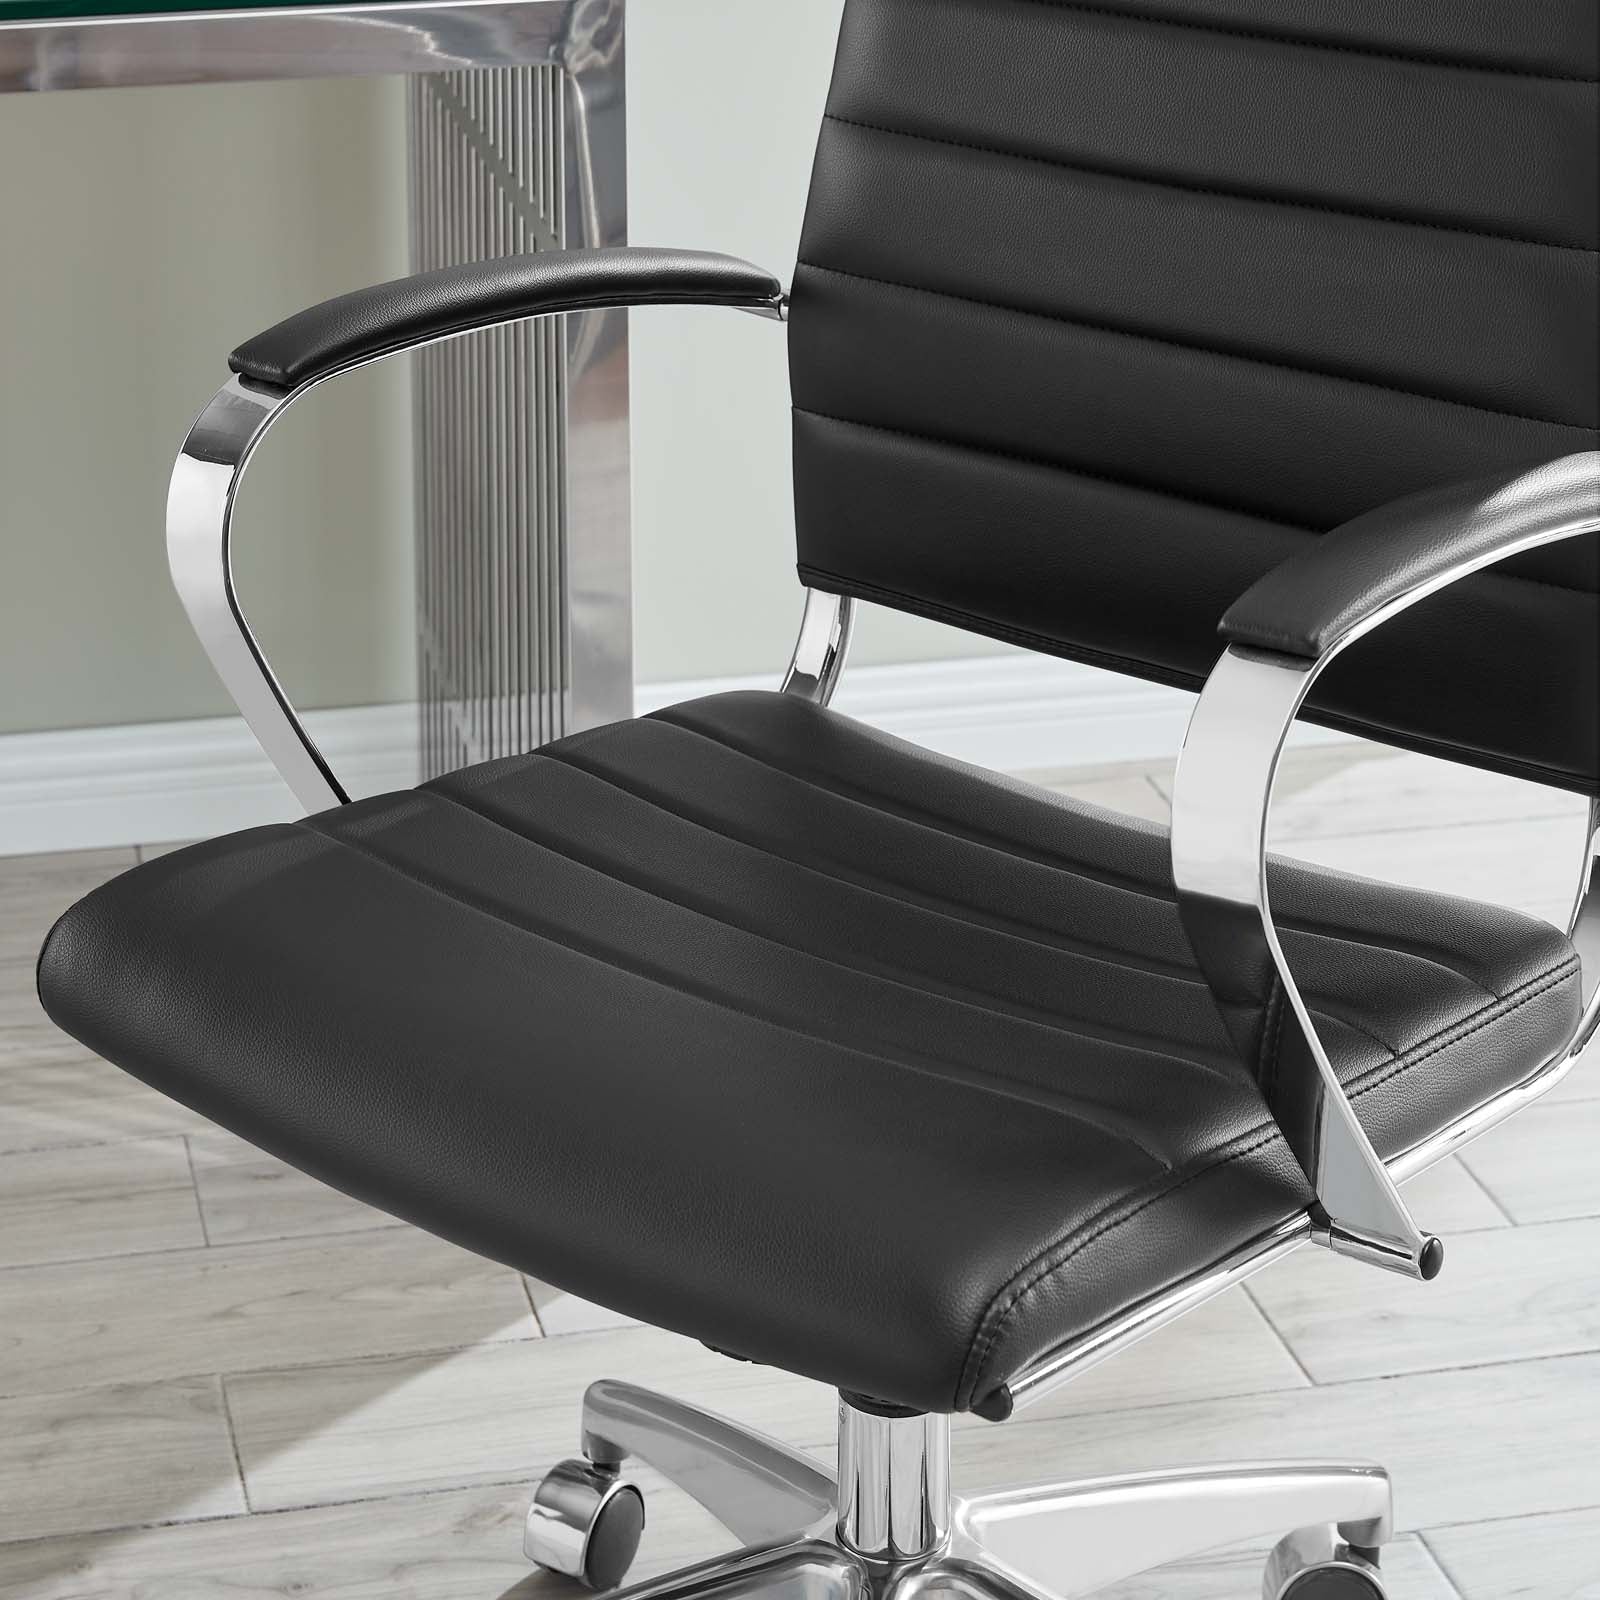 Modway Task Chairs - Jive Highback Office Chair Black